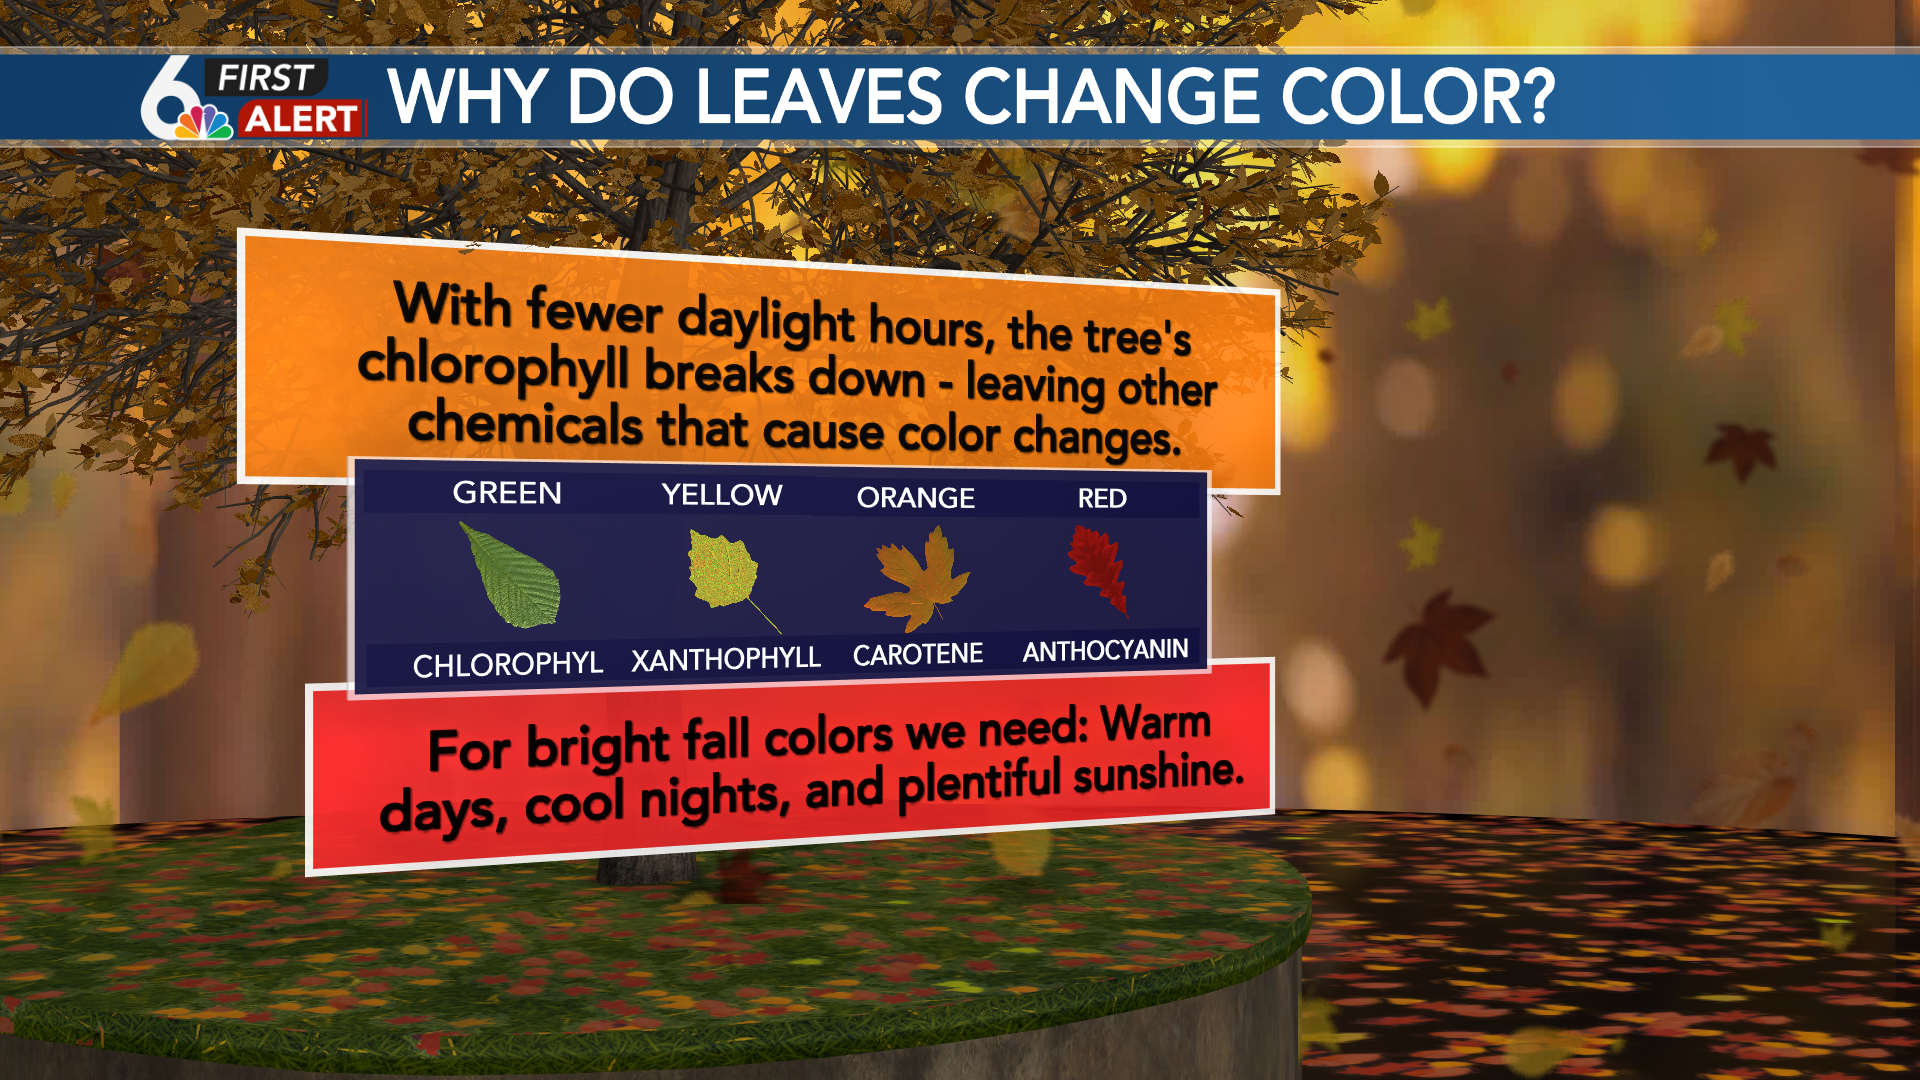 Why Do Leaves Change Colors in the Fall?